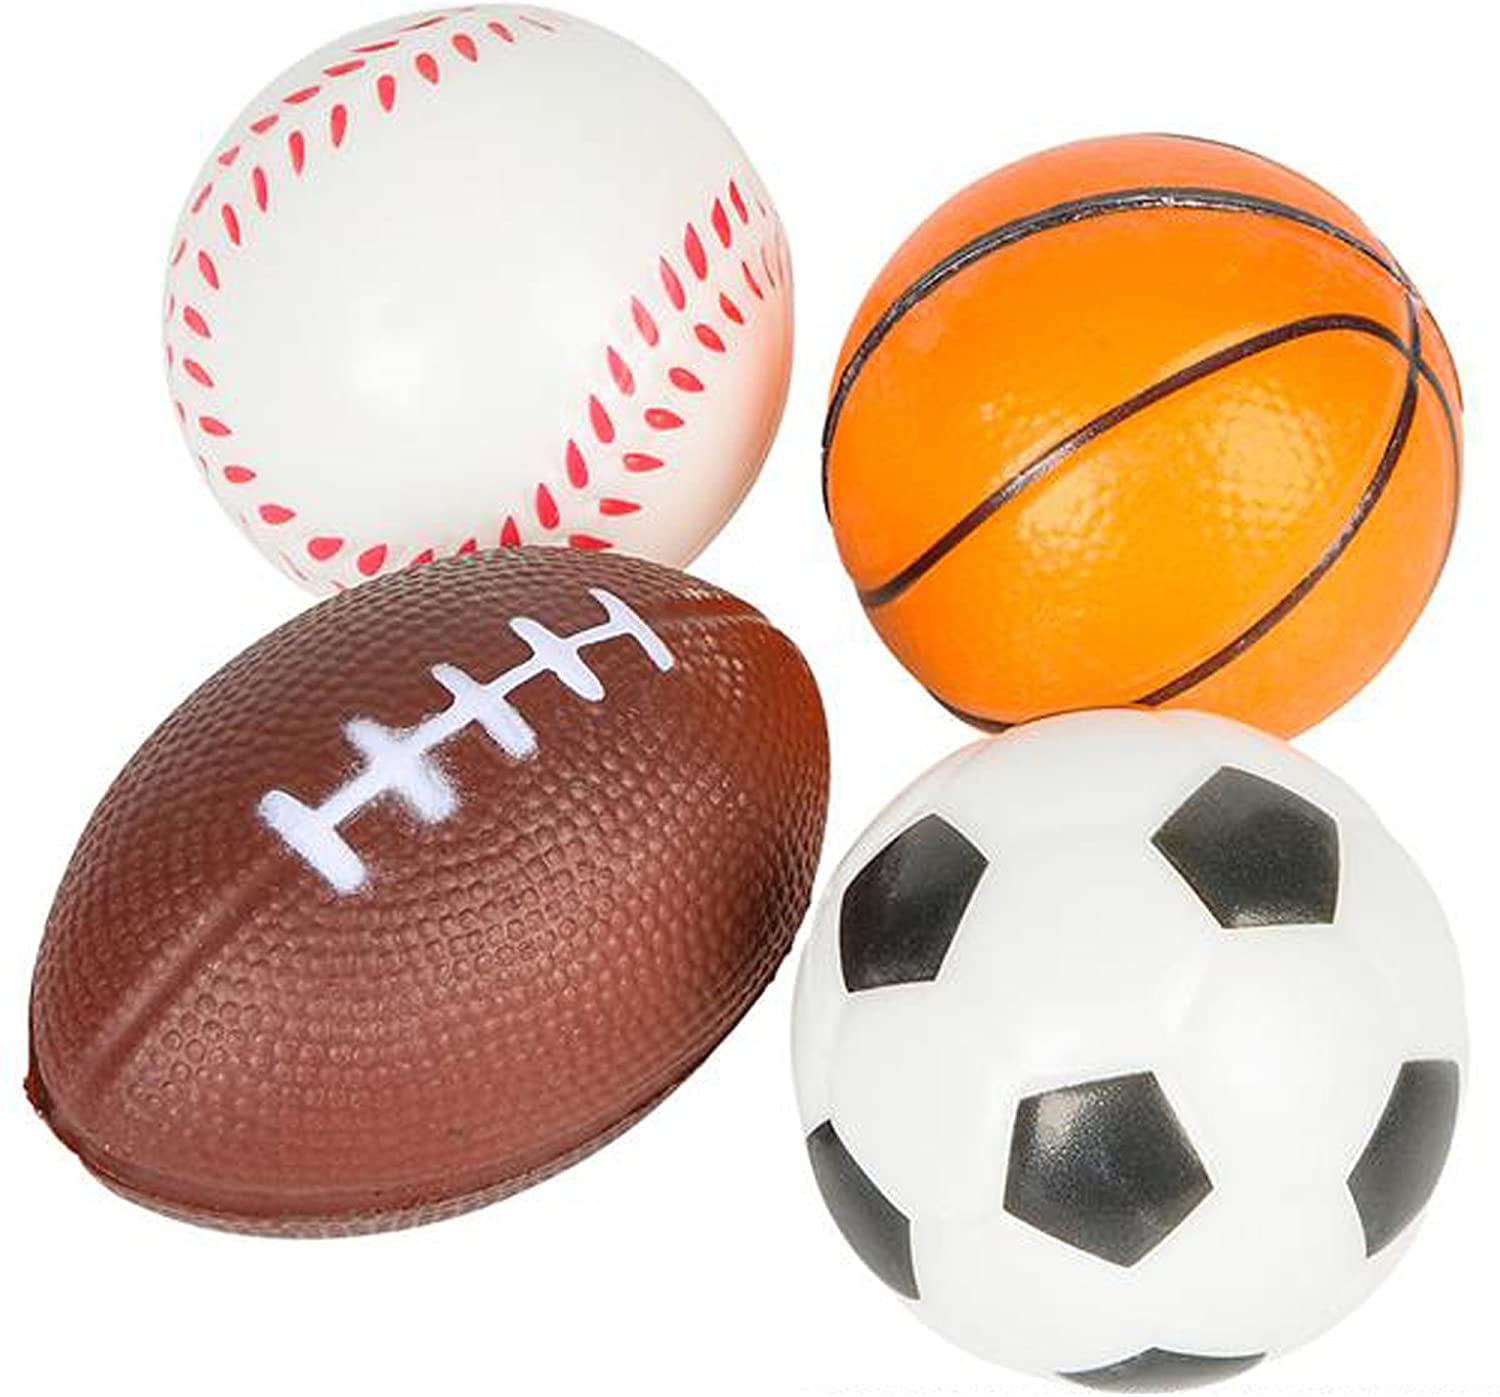 Mardi Gras Prizes Gadget Toys Basketball Soccer for Stress Relief Soccer Party Supplies Relaxation Gadgets 12 Packs and 4 Ball Games Compressible Stress Balls Baseball 